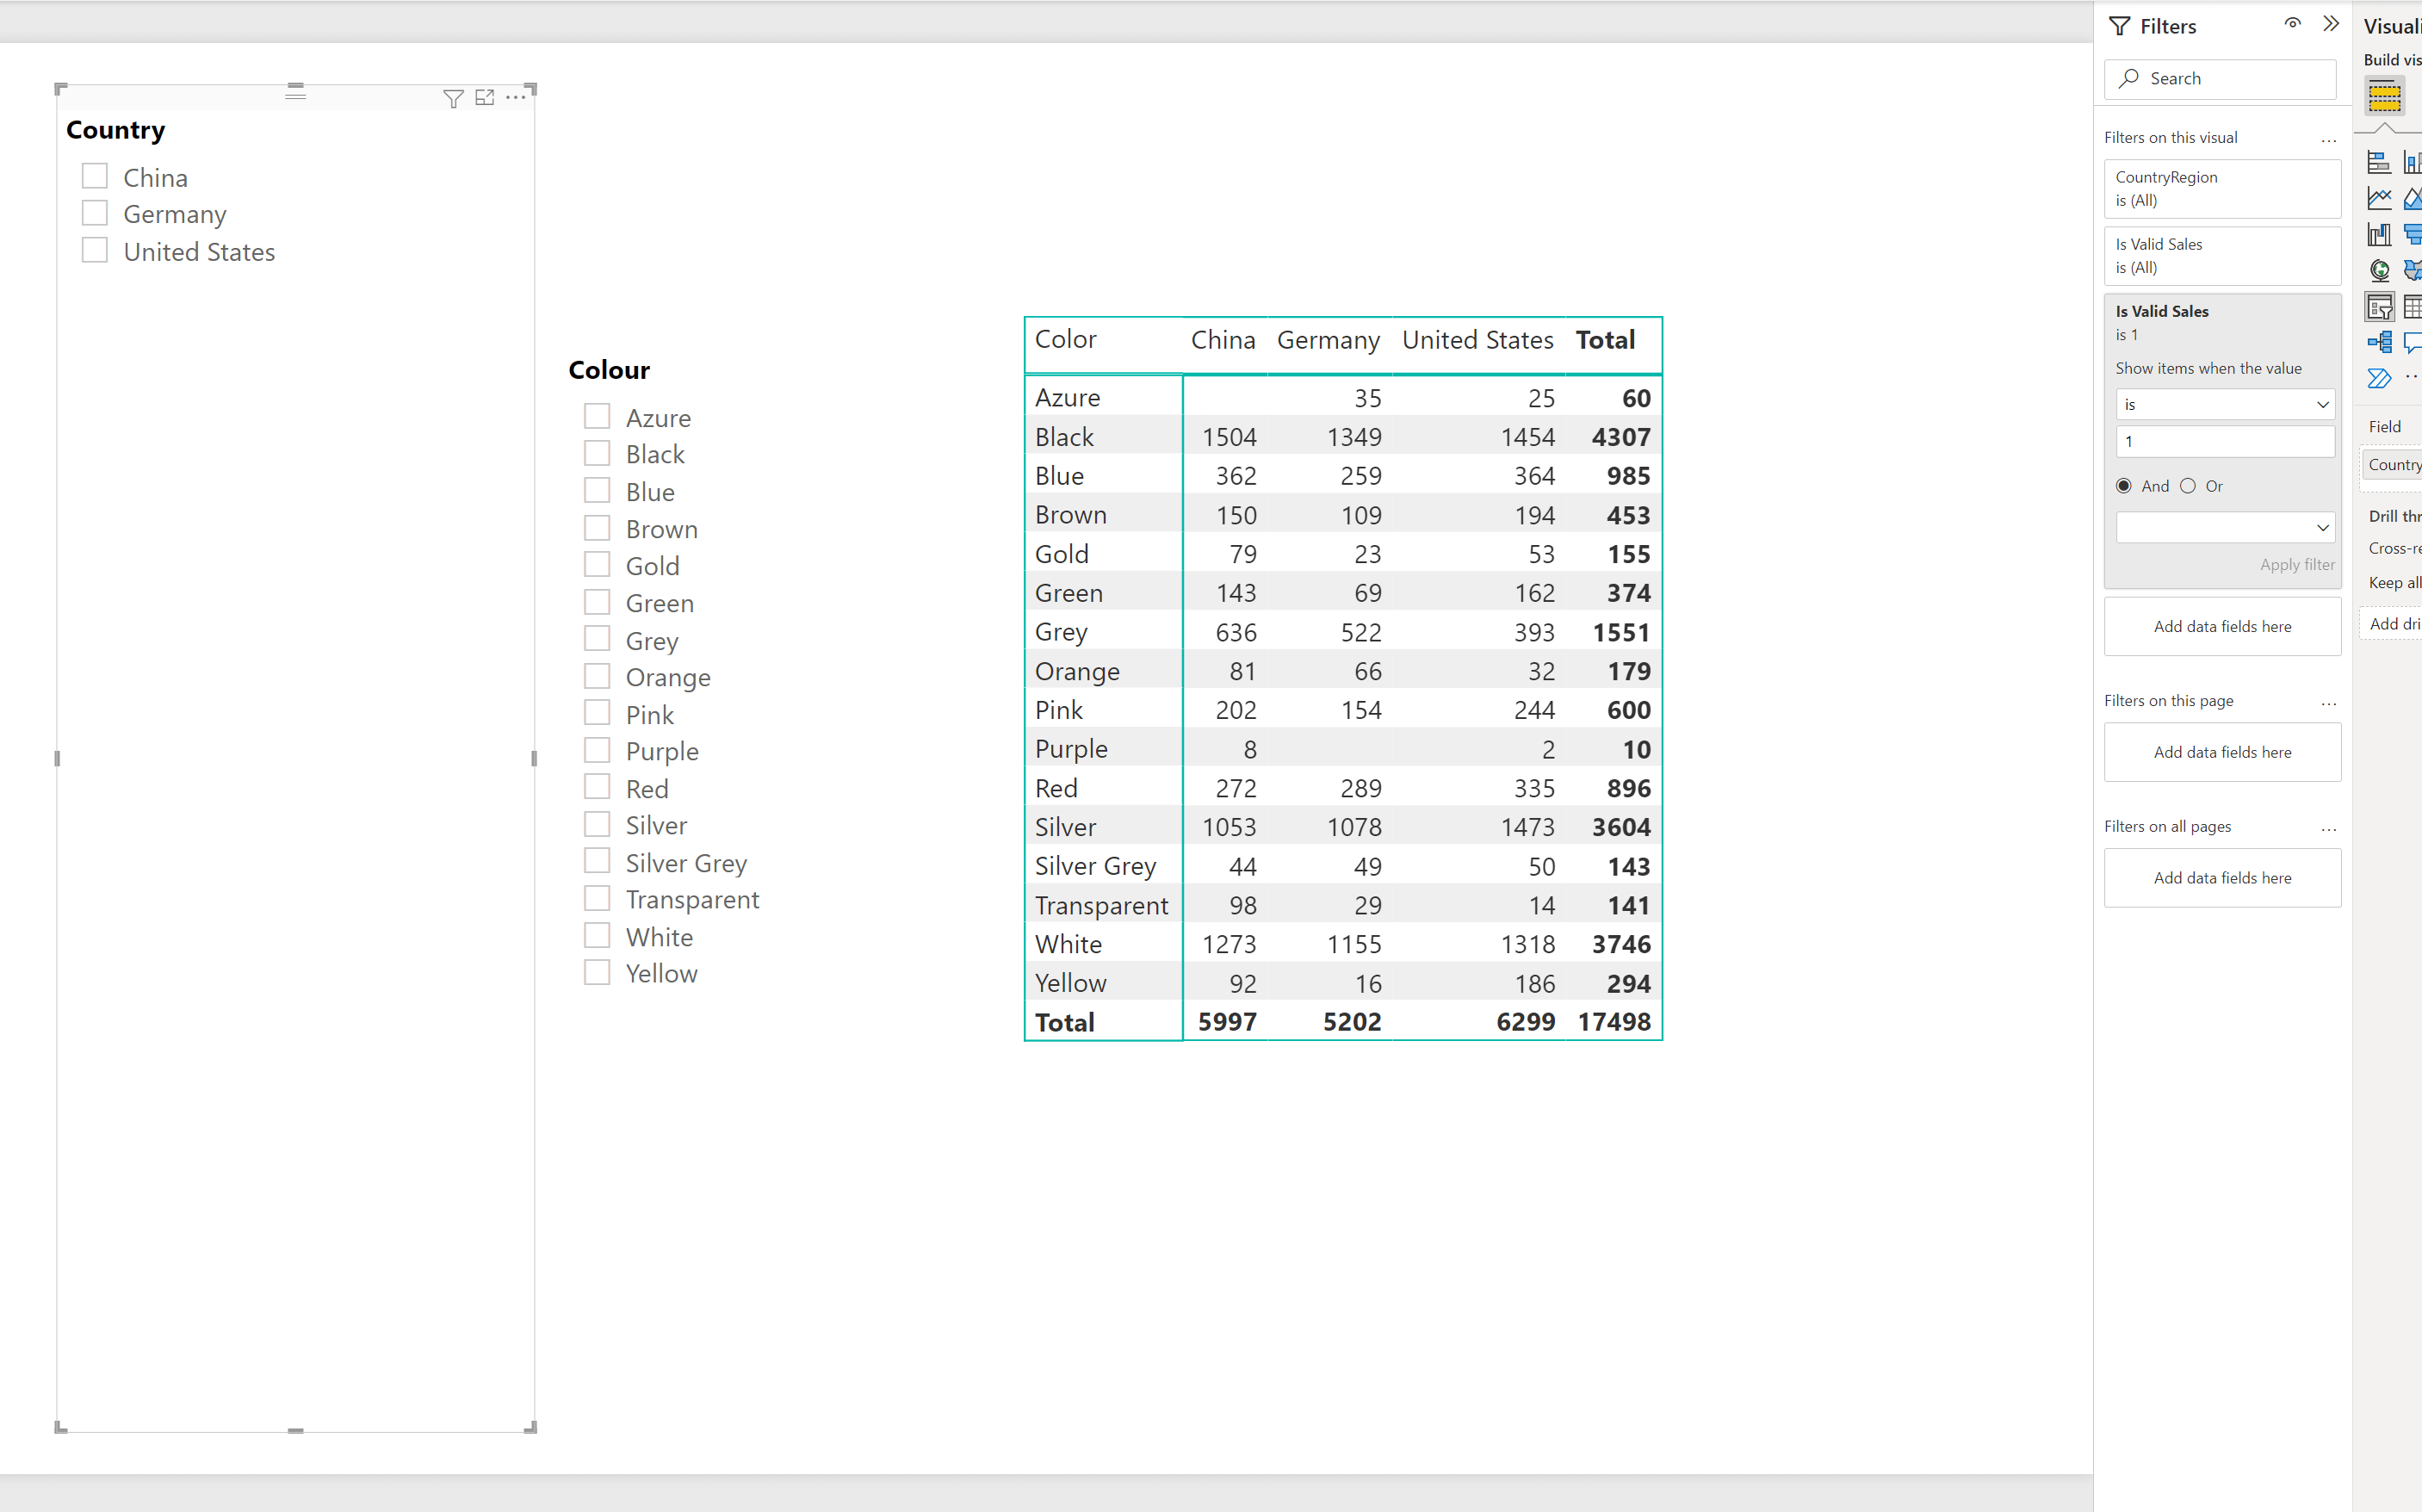 Showing the report, the slicer visual for Country is selected. On the filters pane, the measure has been added and set to show items when the value is 1. The slicer for Country is now only displaying options for three countries.